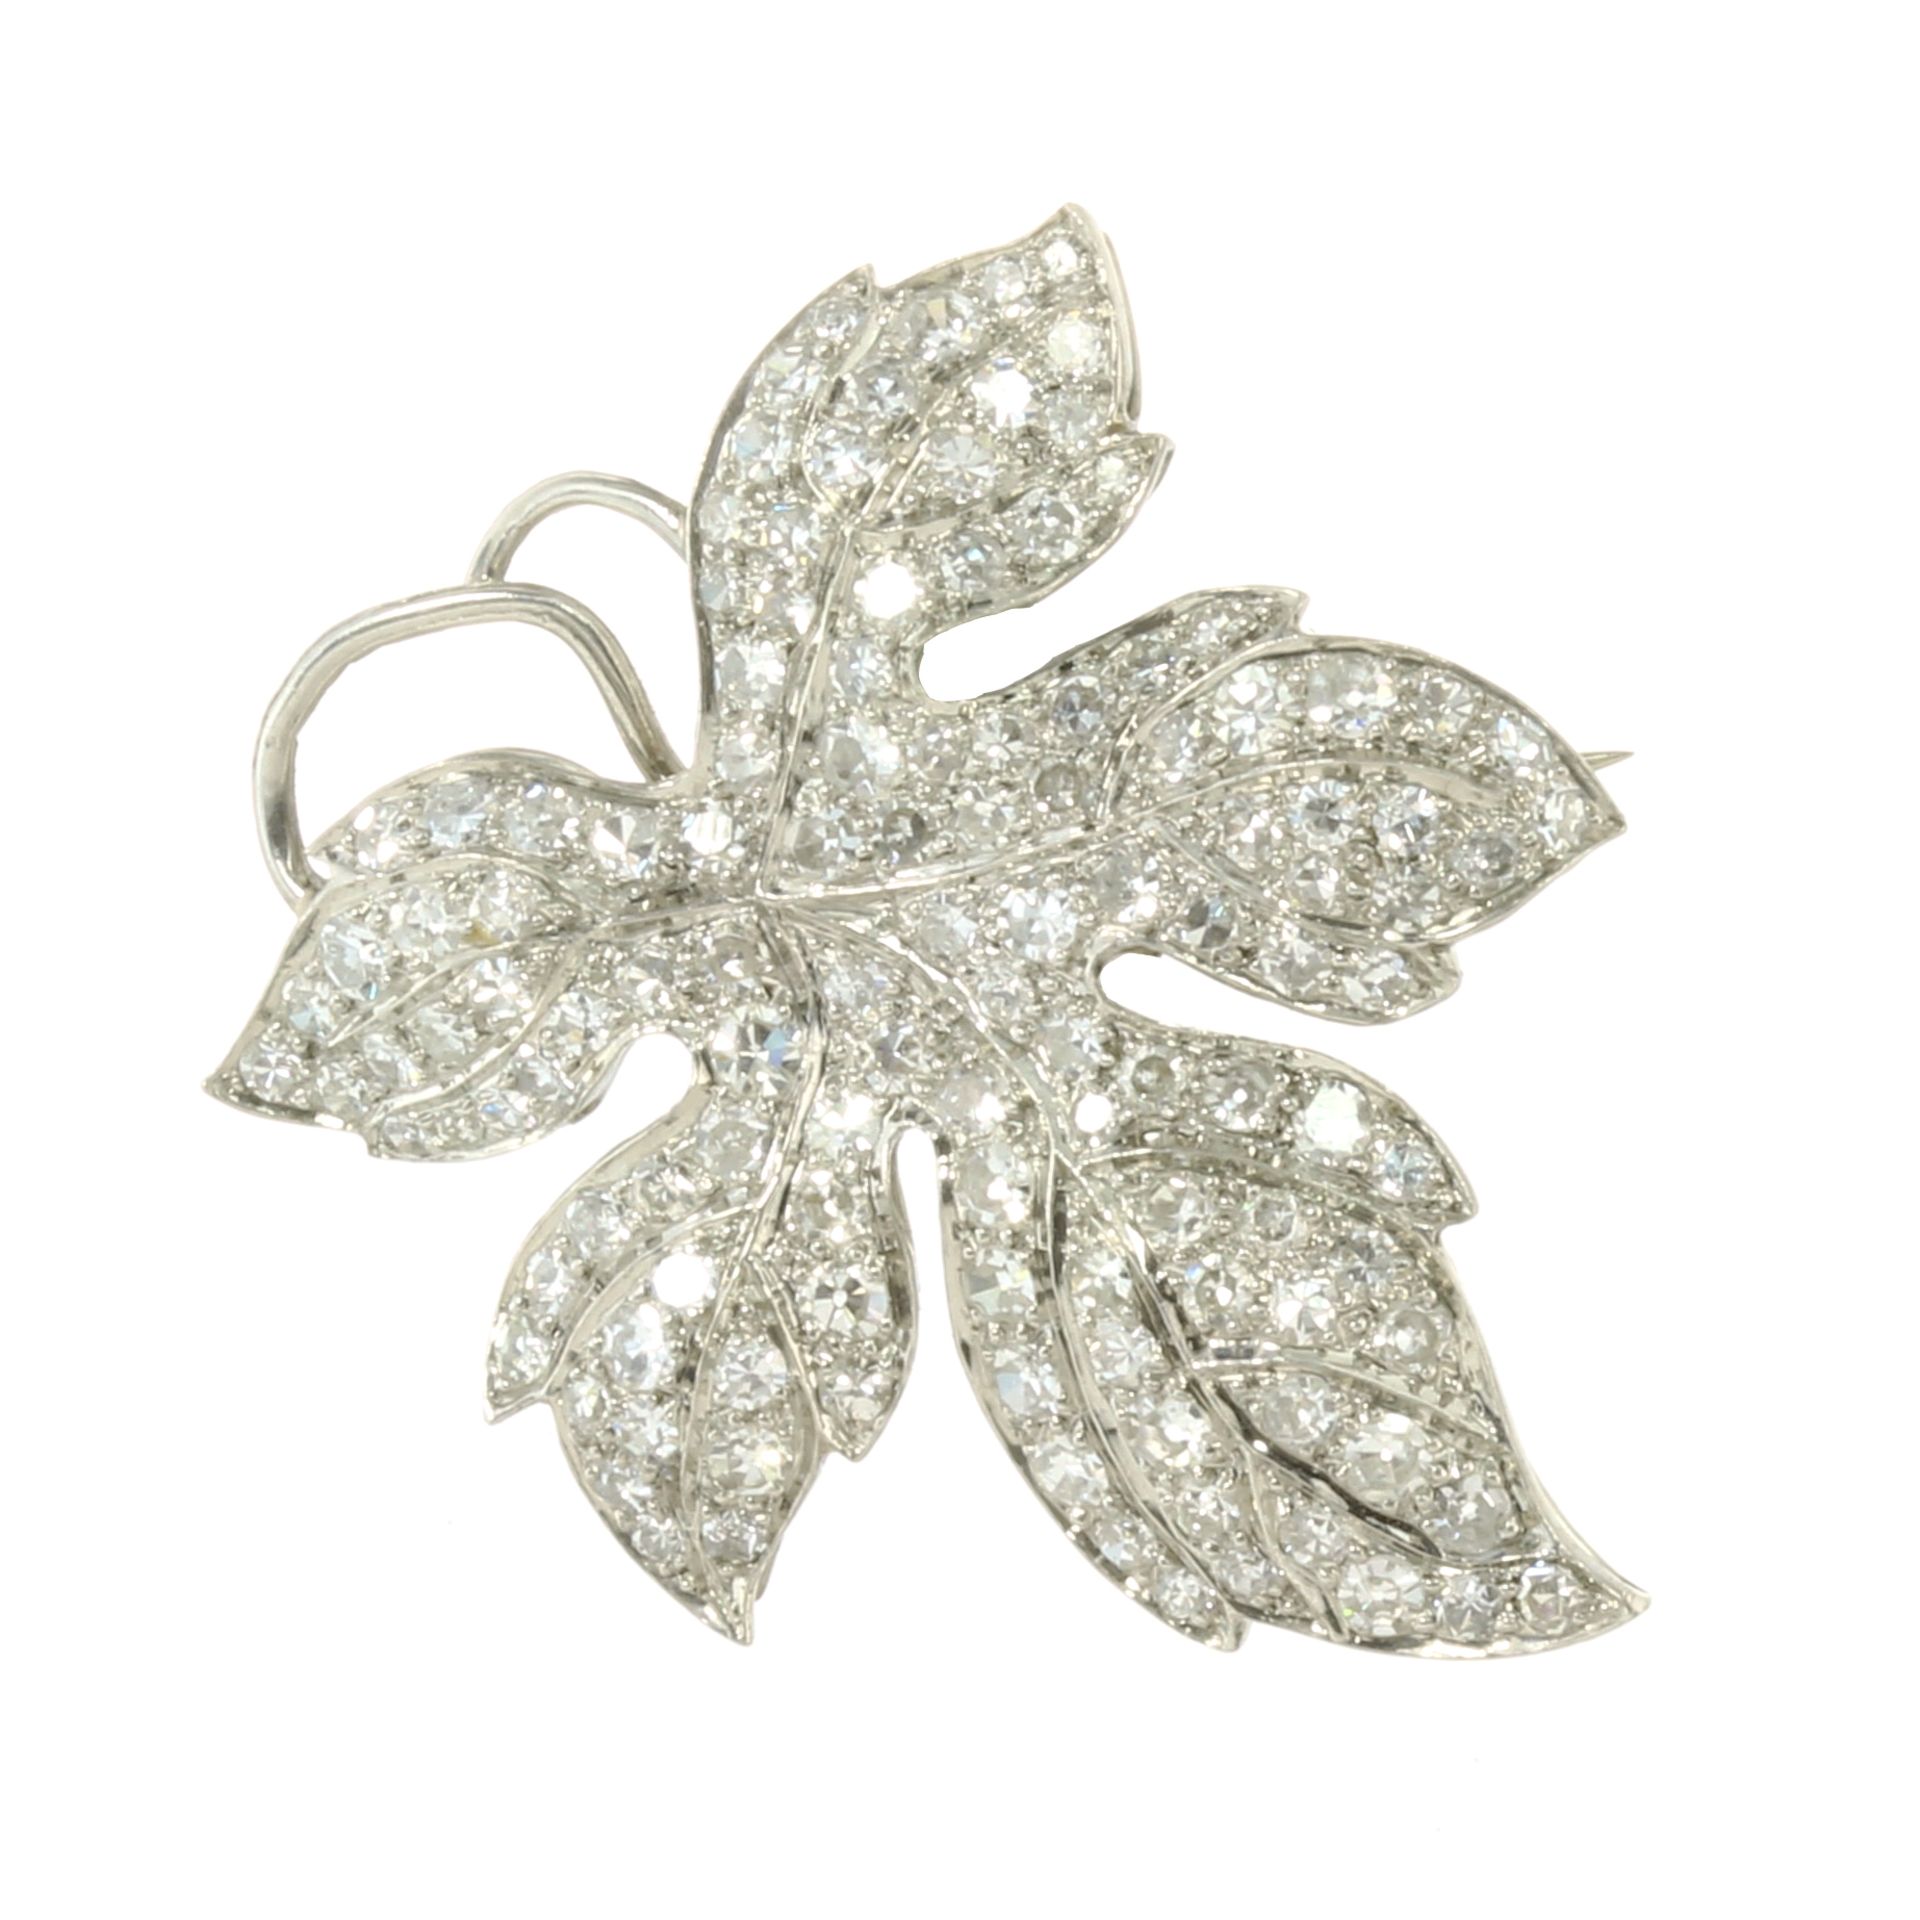 A DIAMOND MAPLE LEAF BROOCH in white gold or platinum, designed as a maple leaf, jewelled all over